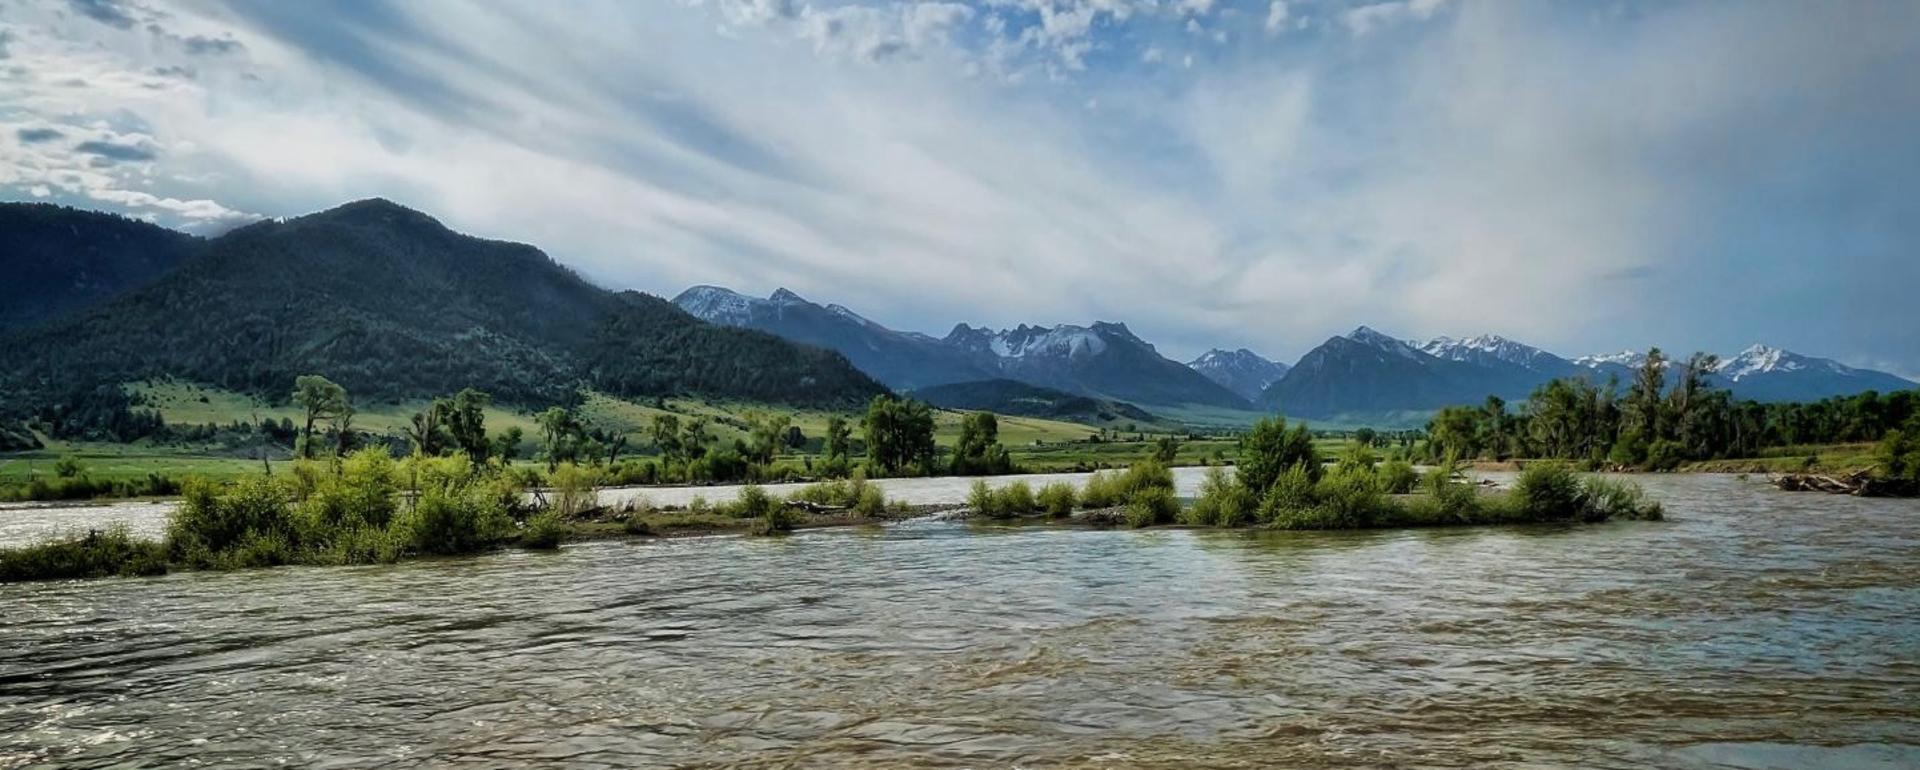 Can the majesty of the Yellowstone River endure?